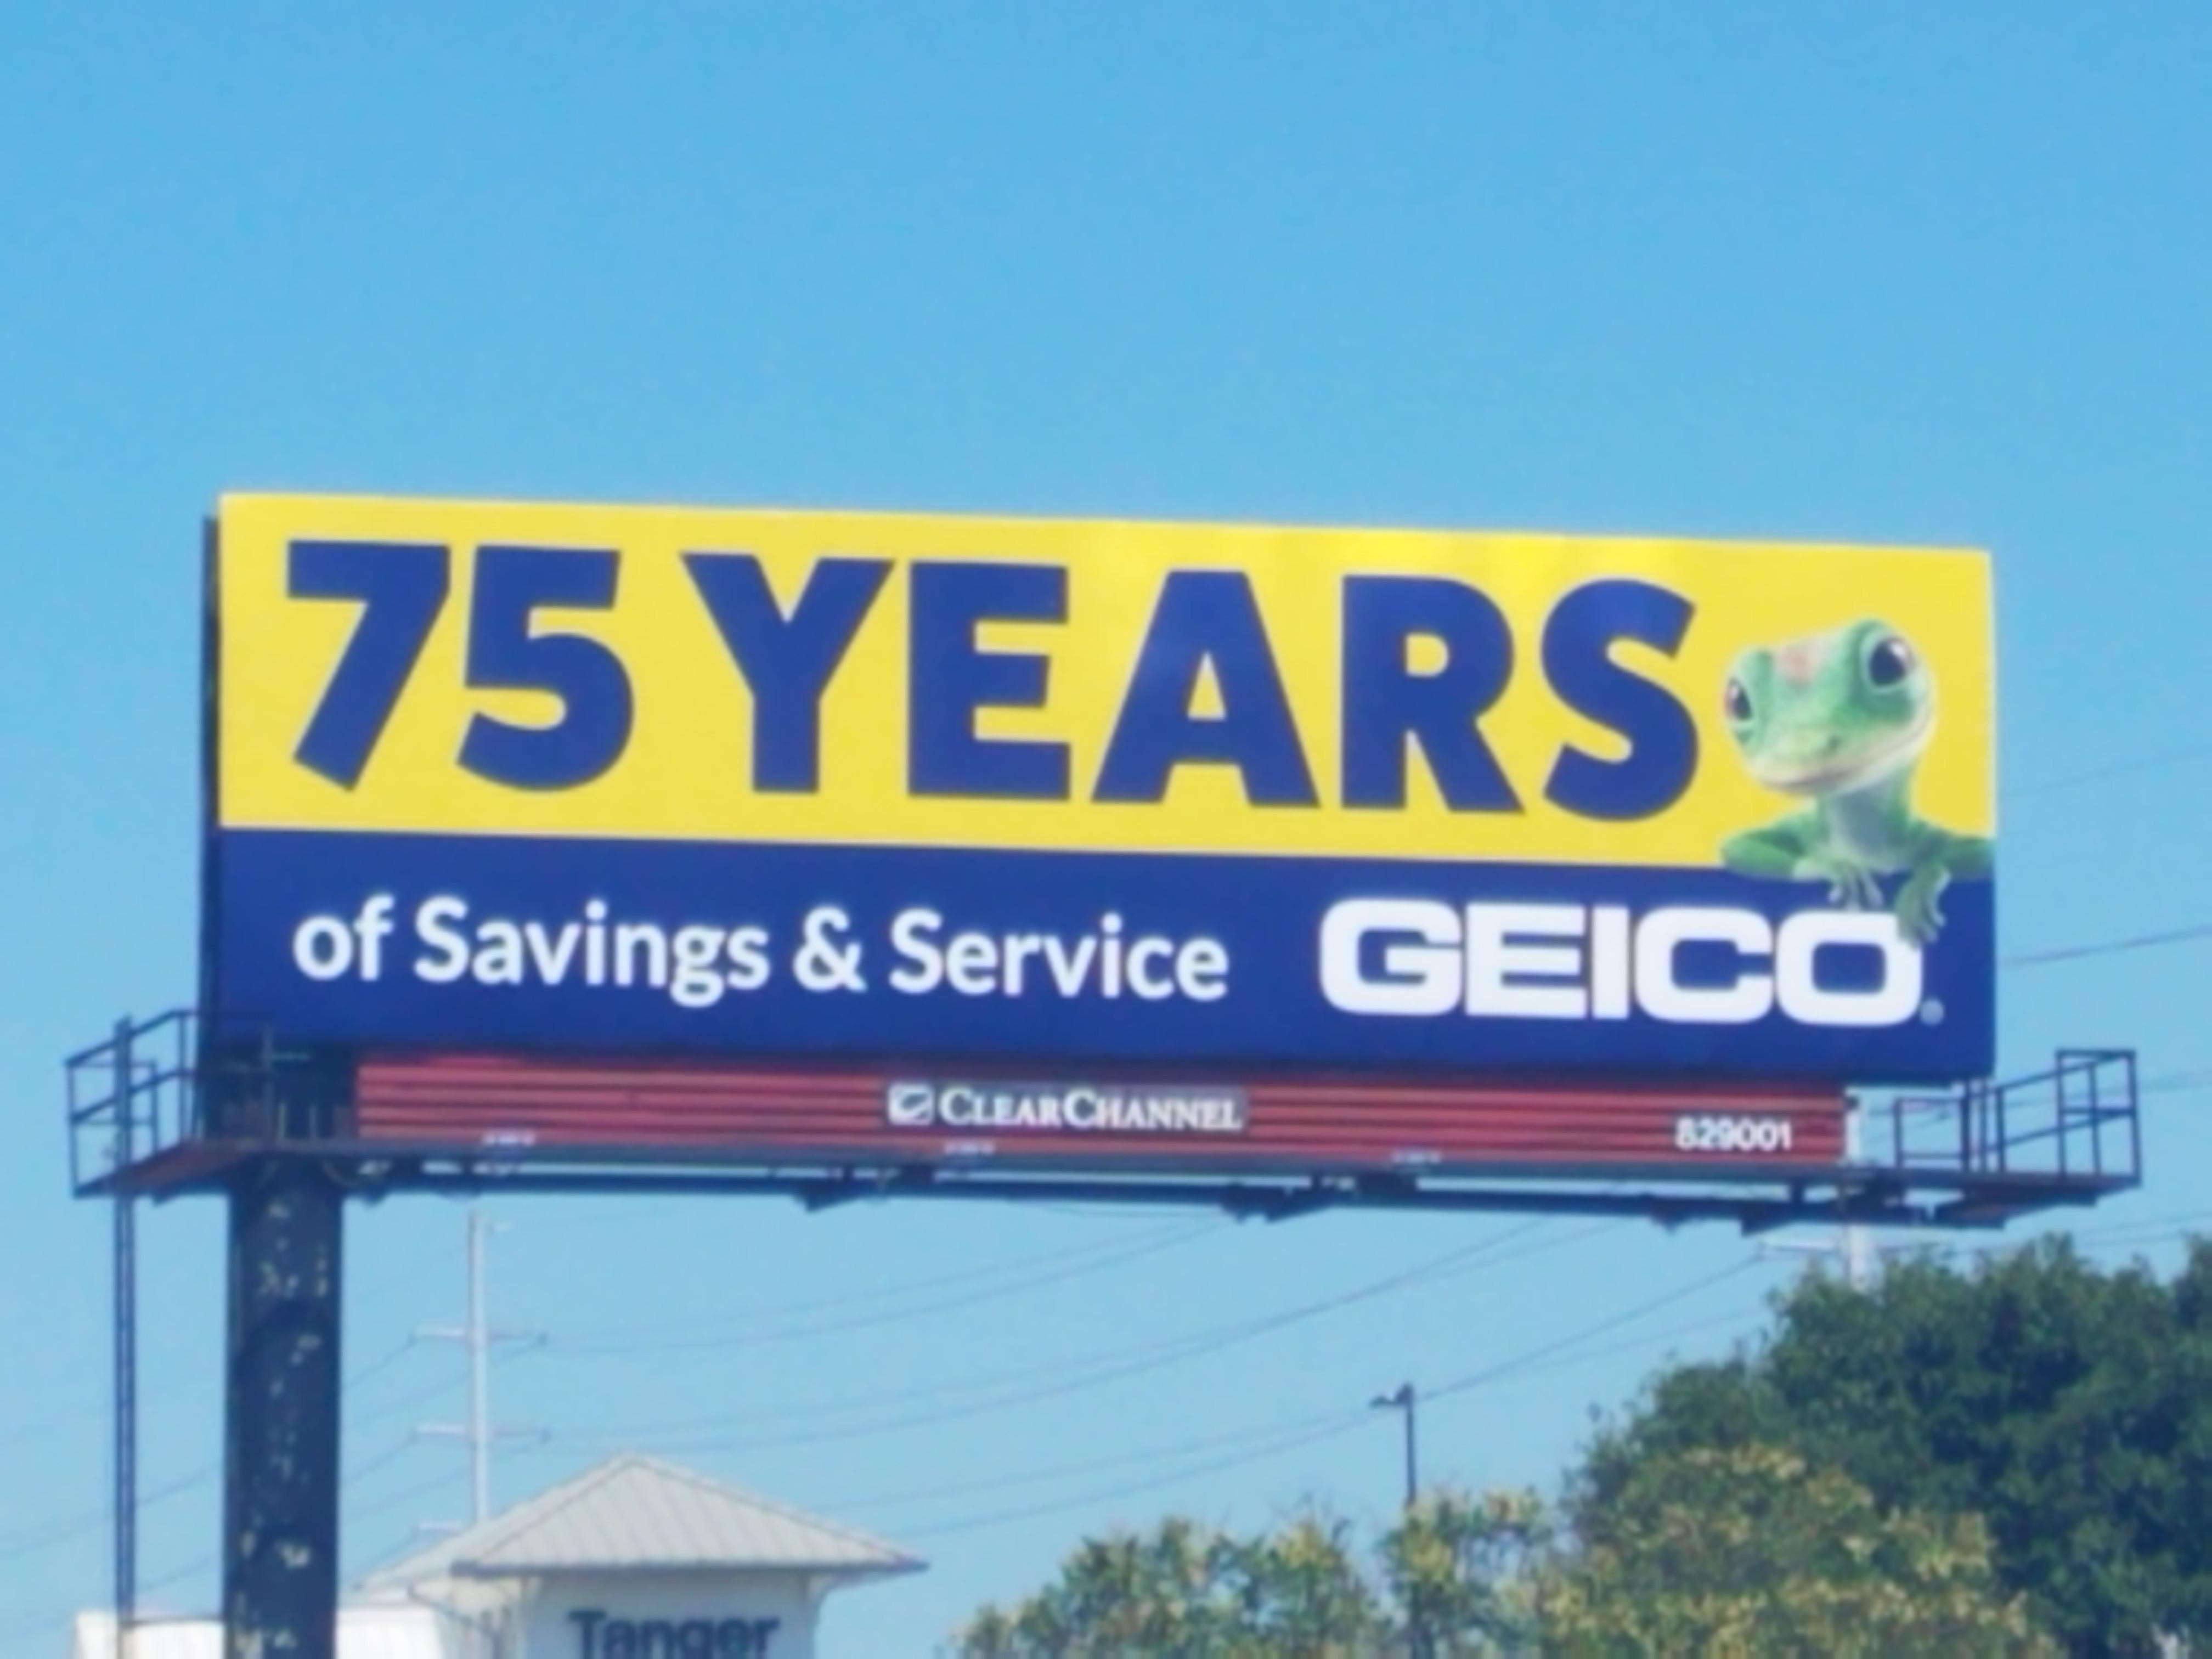 GEICO Small Logo - GEICO Claims: Your Questions Answered (by Insurance Lawyers)